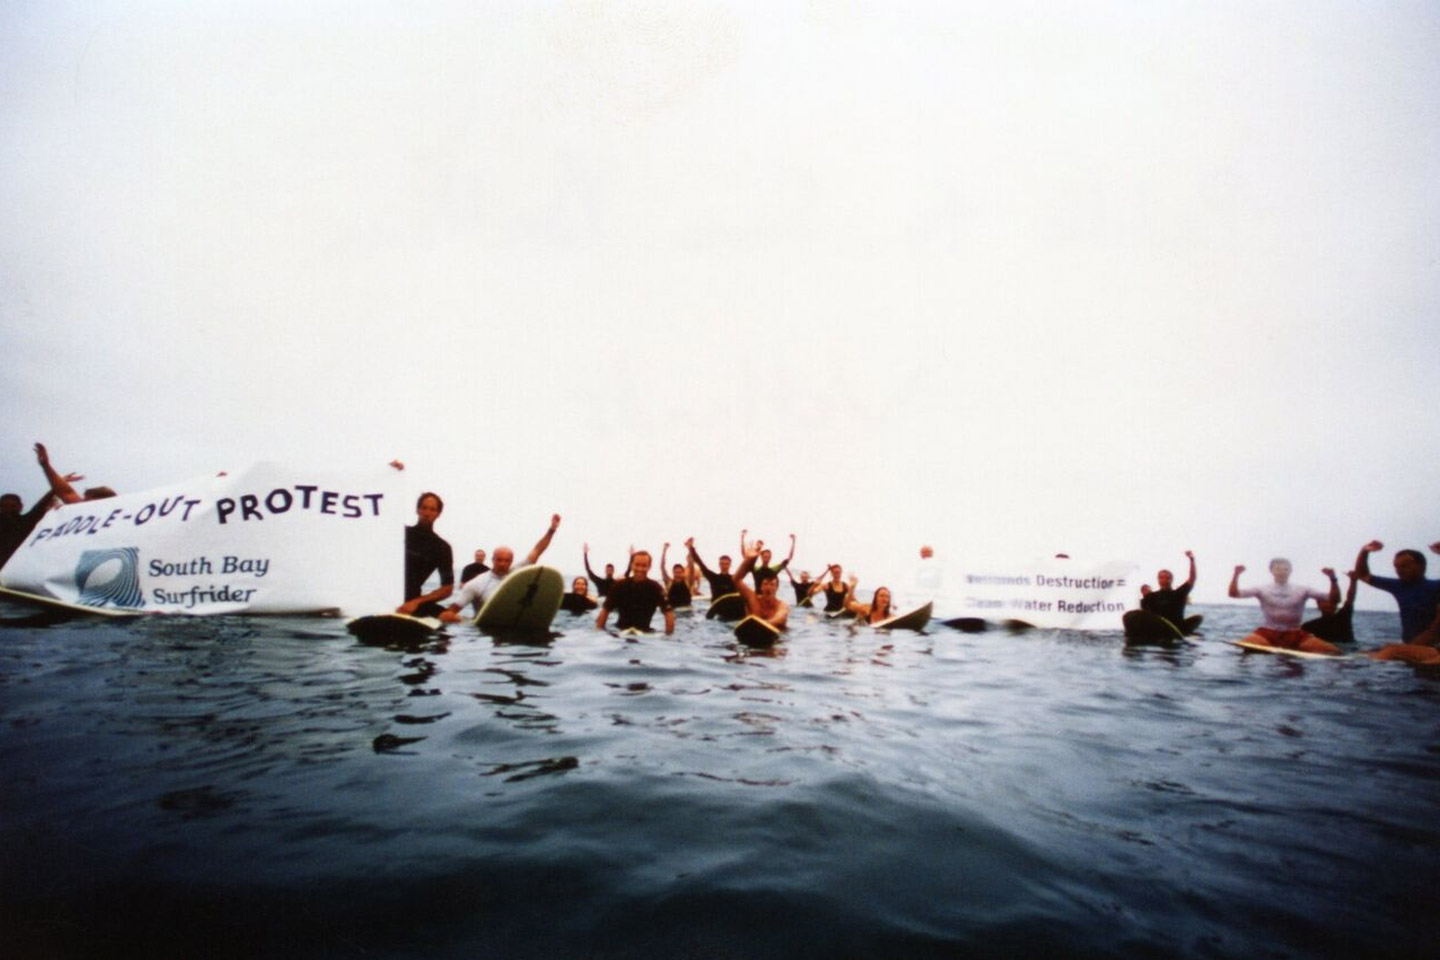 A group of surfers in the water holding protest banners